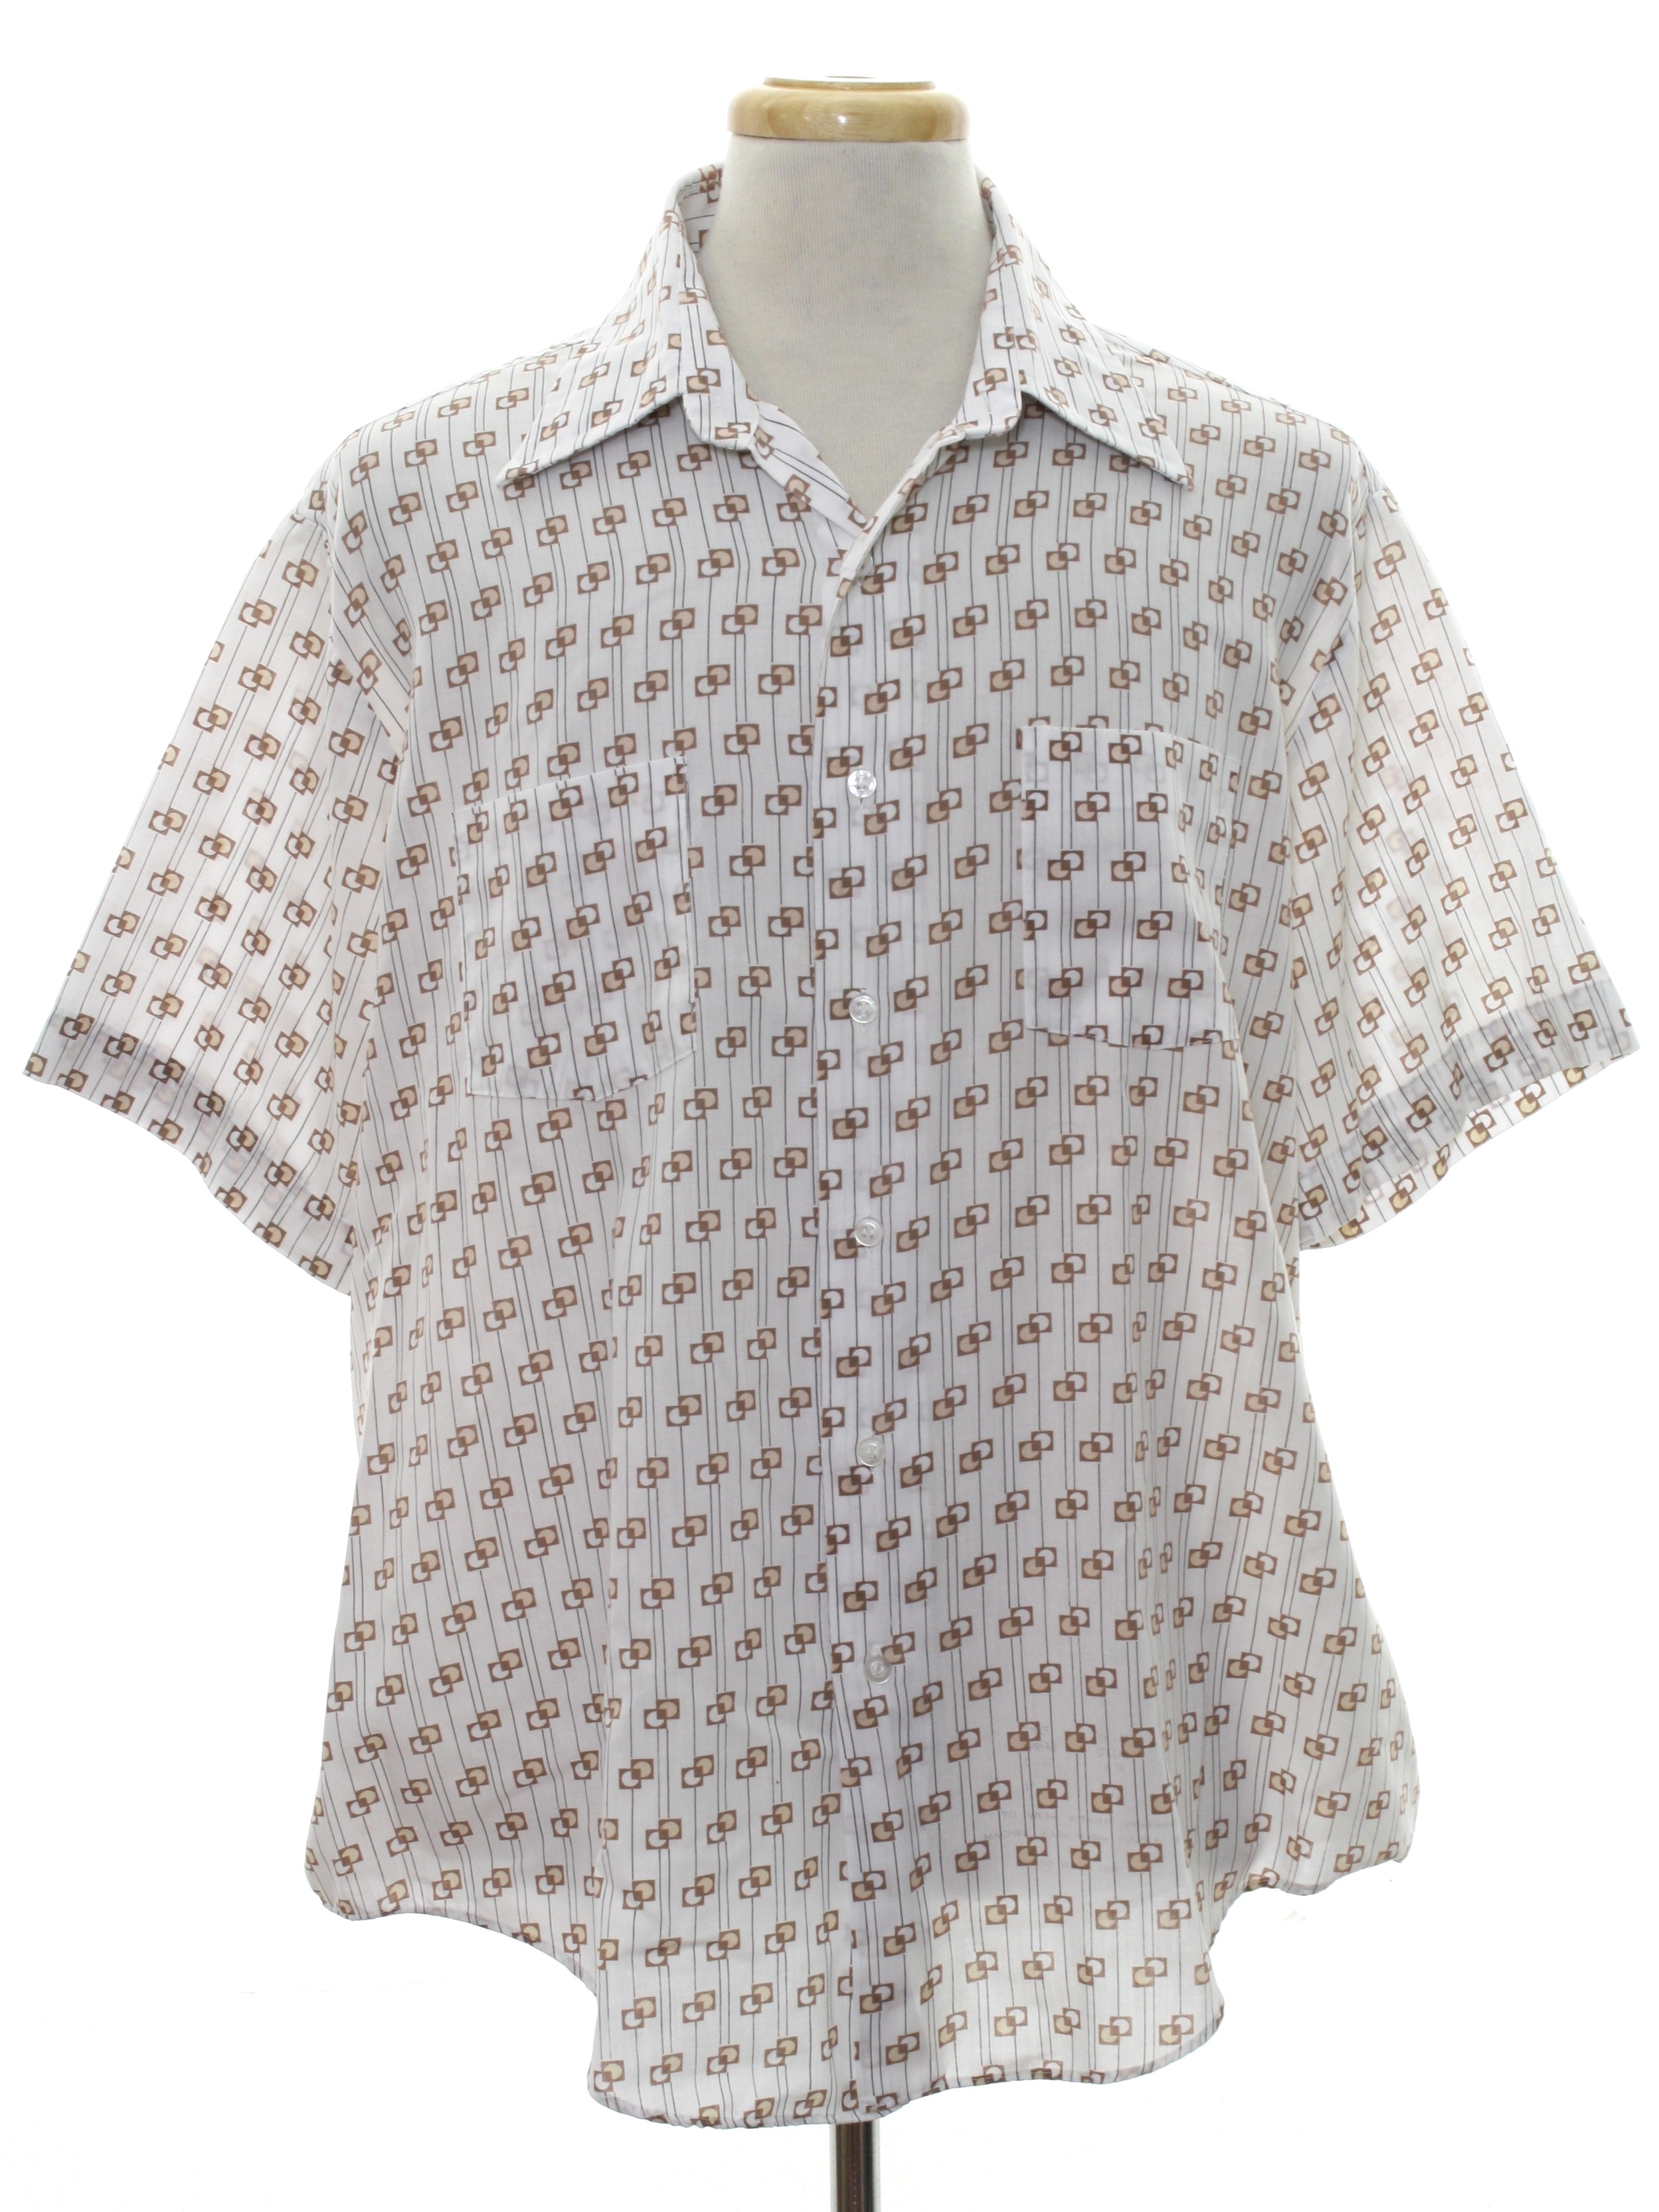 Vintage 60s Shirt: Late 60s -Sears Perma Prest- Mens white background ...